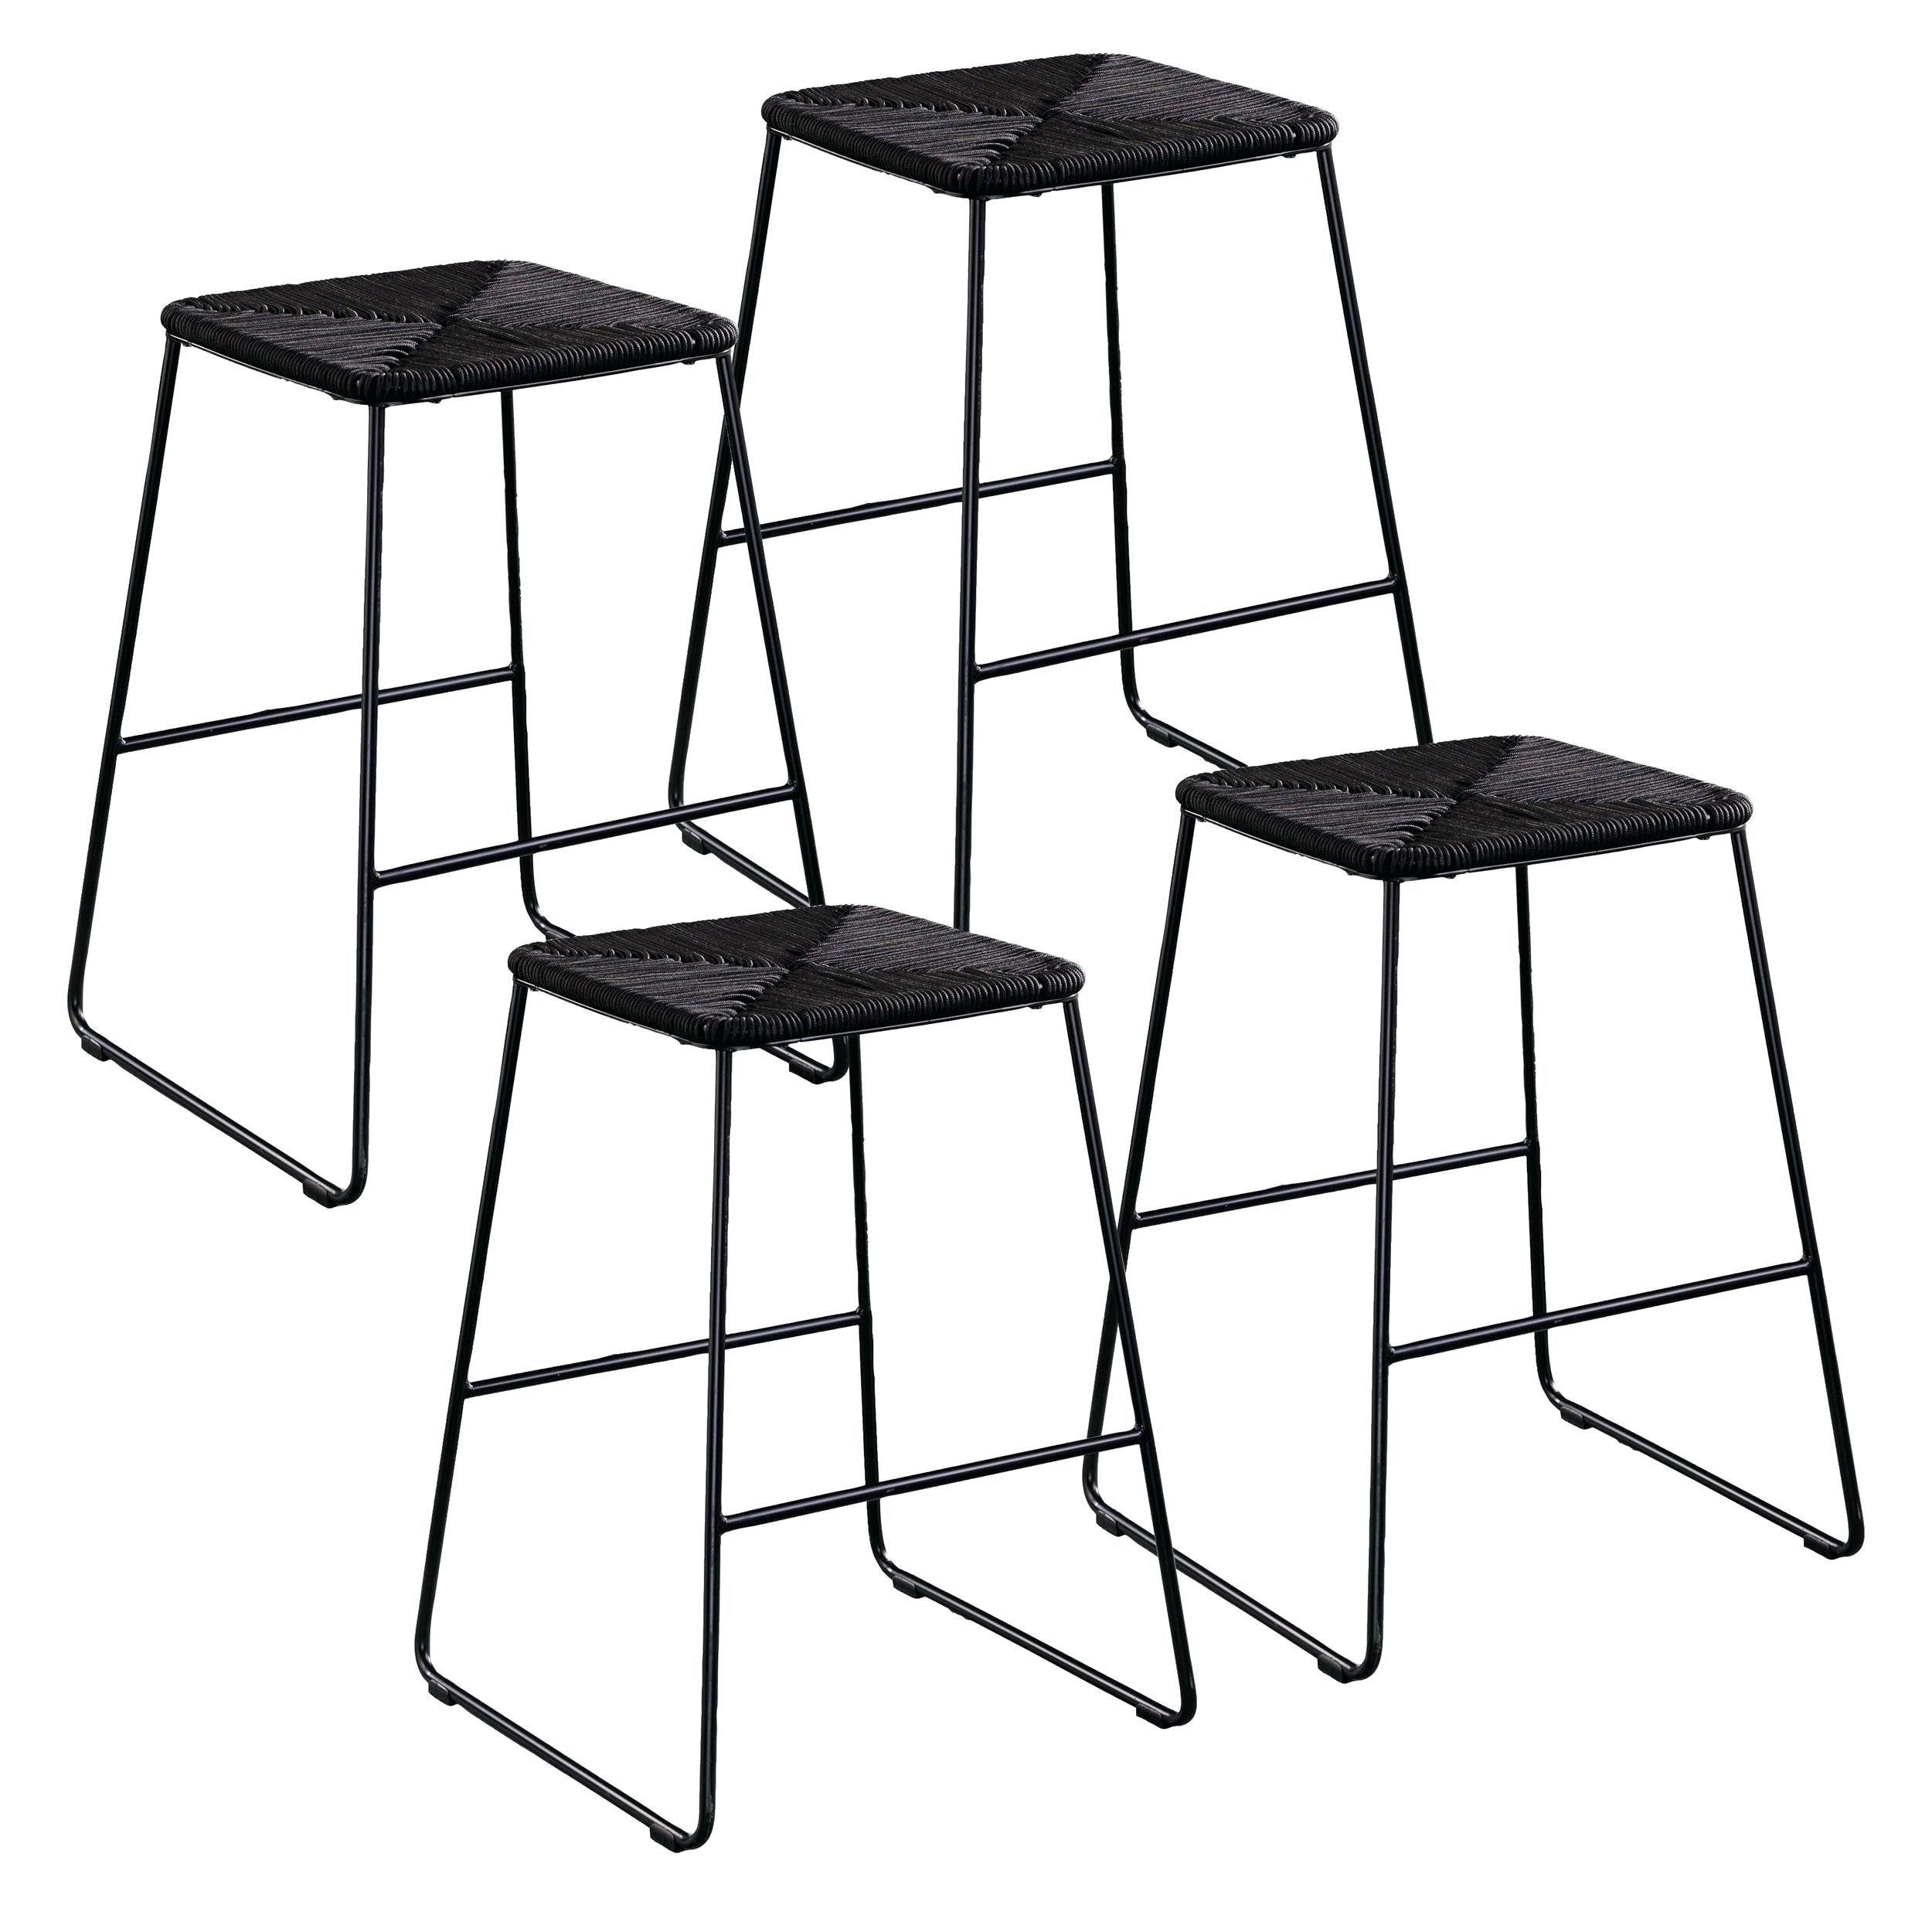 Stackable Patio Chairs Xiaomouzonco in size 2500 X 2500